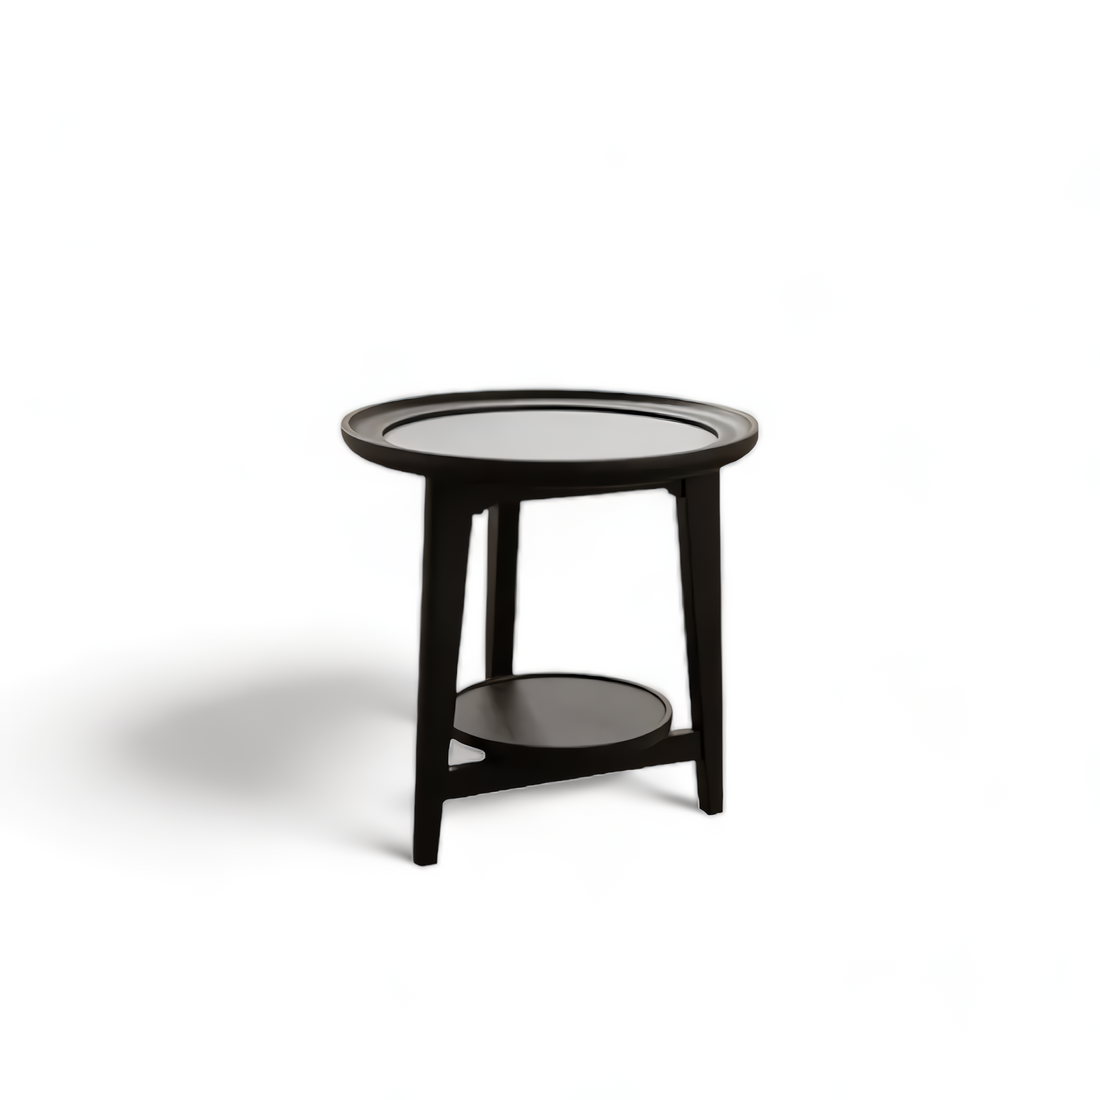 &C SIDE TABLE